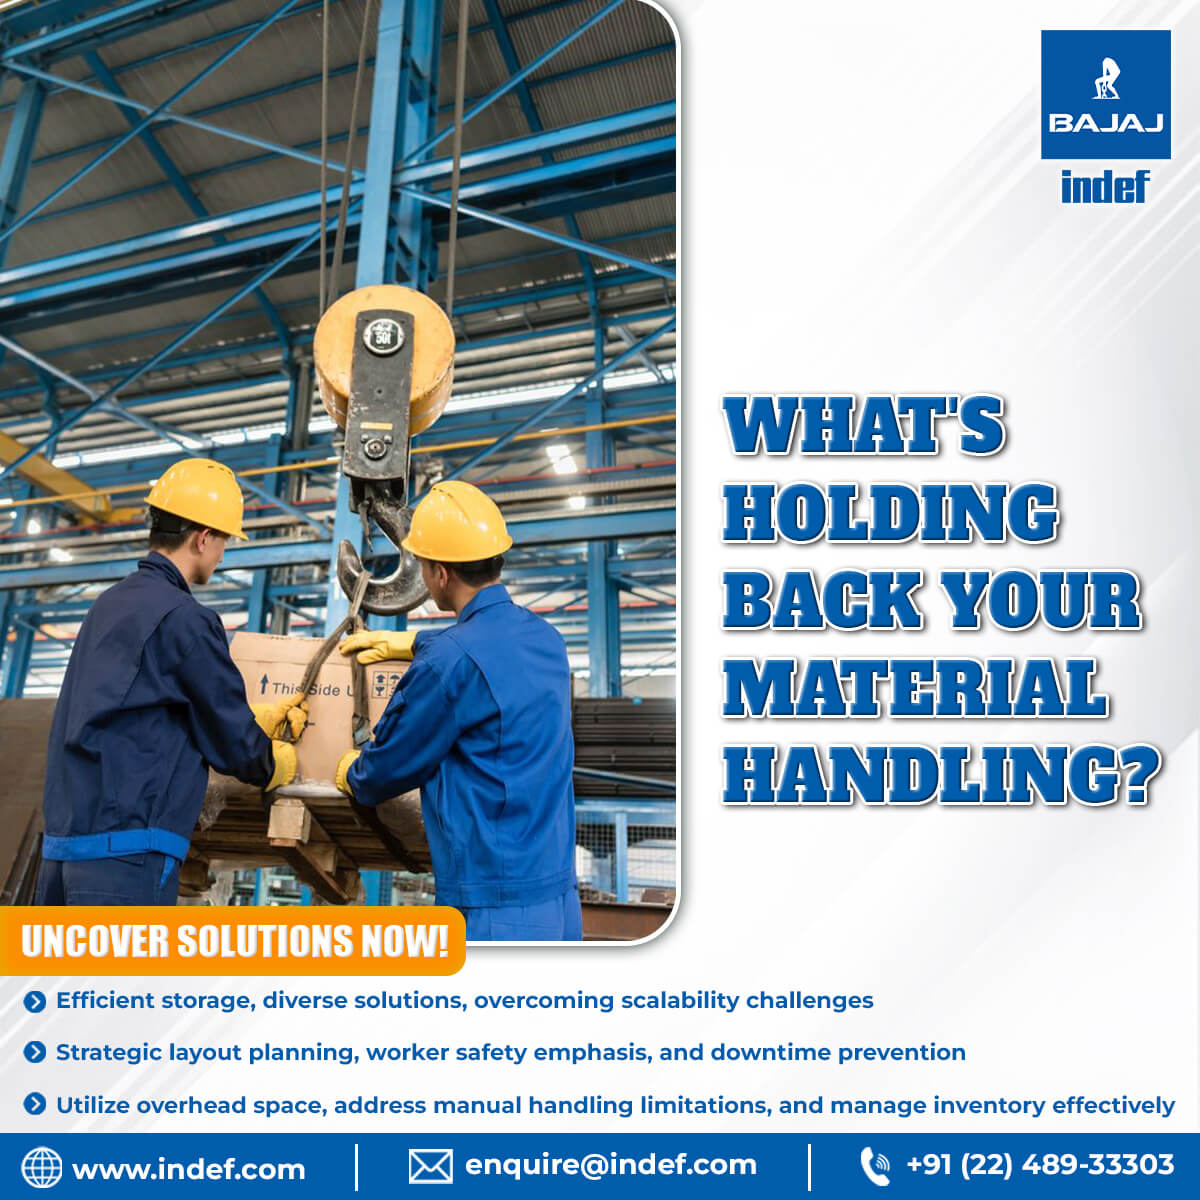 Common Challenges in the Material Handling and How to Overcome Them